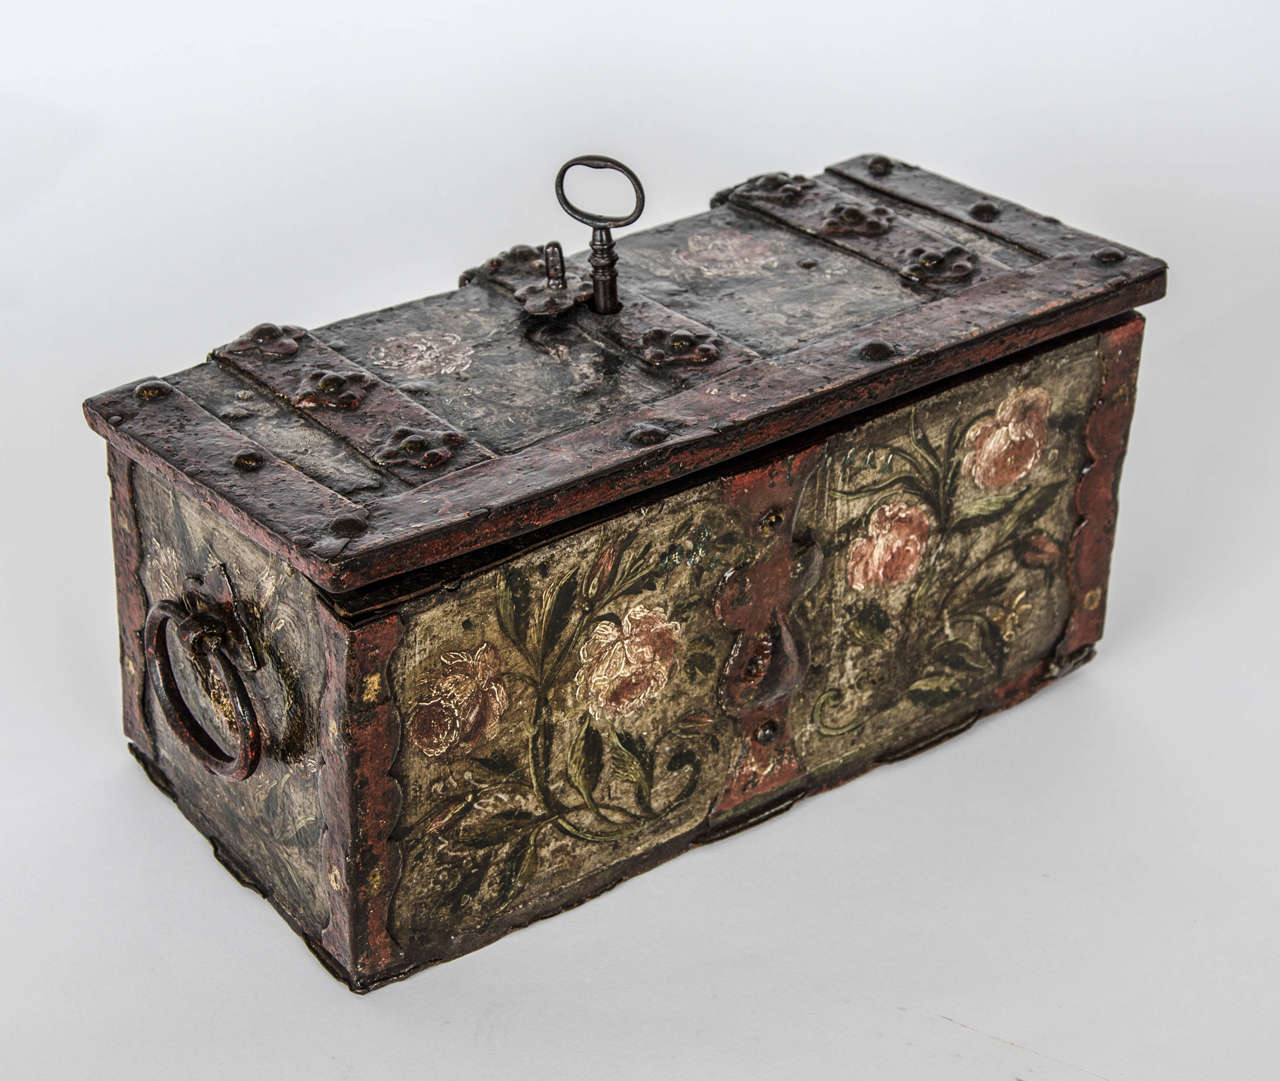 A German early 18th century painted dowry casket with intricate lock mechanism.